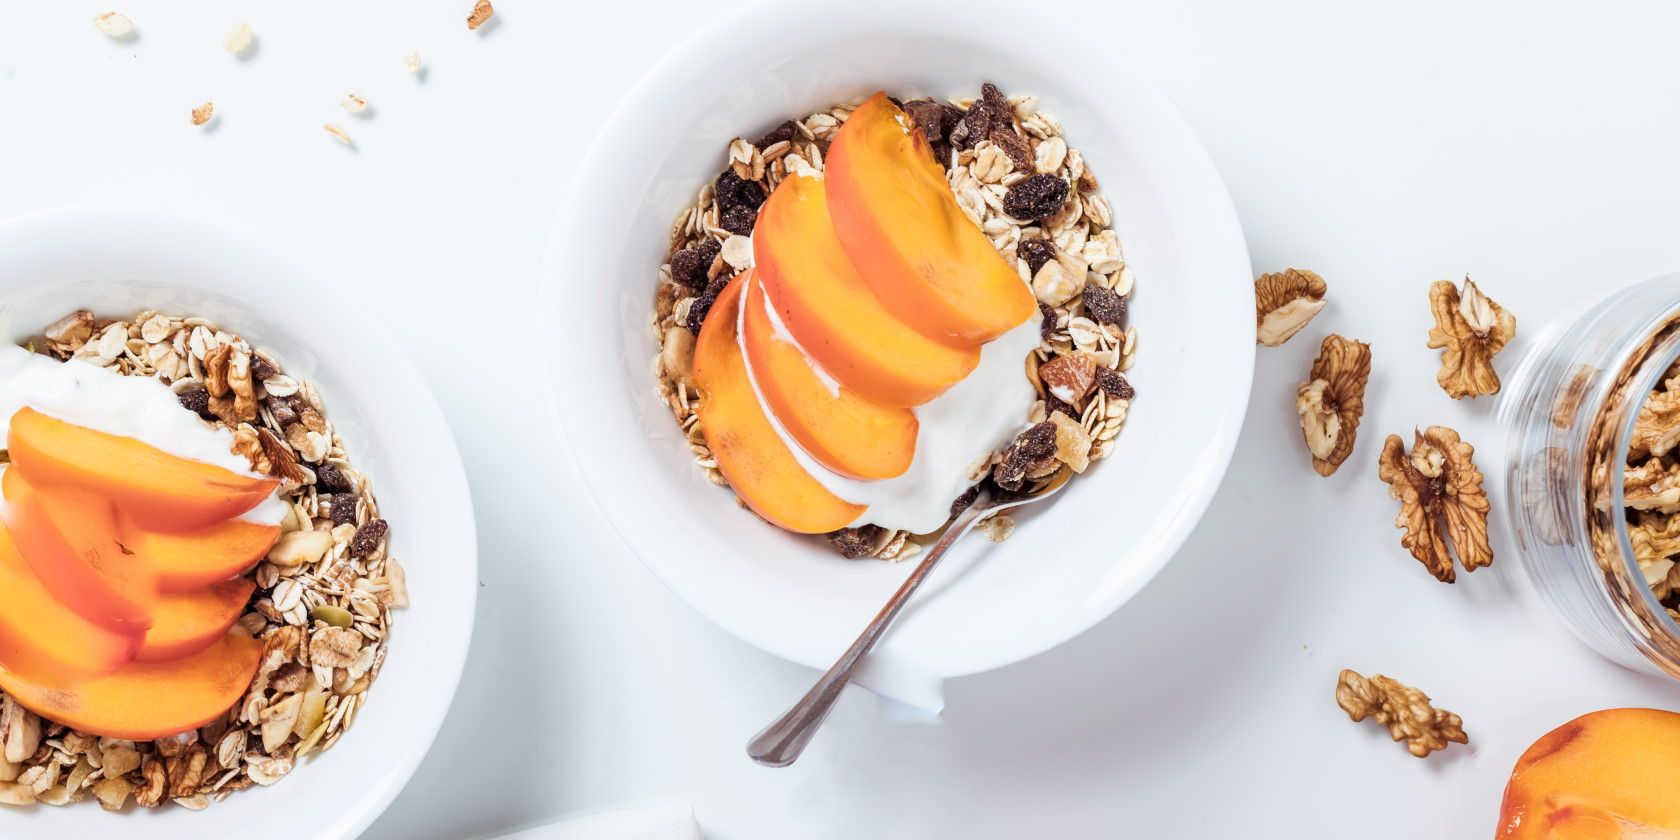 Top view photo of healthy cereal bowl with fruit and yogurt